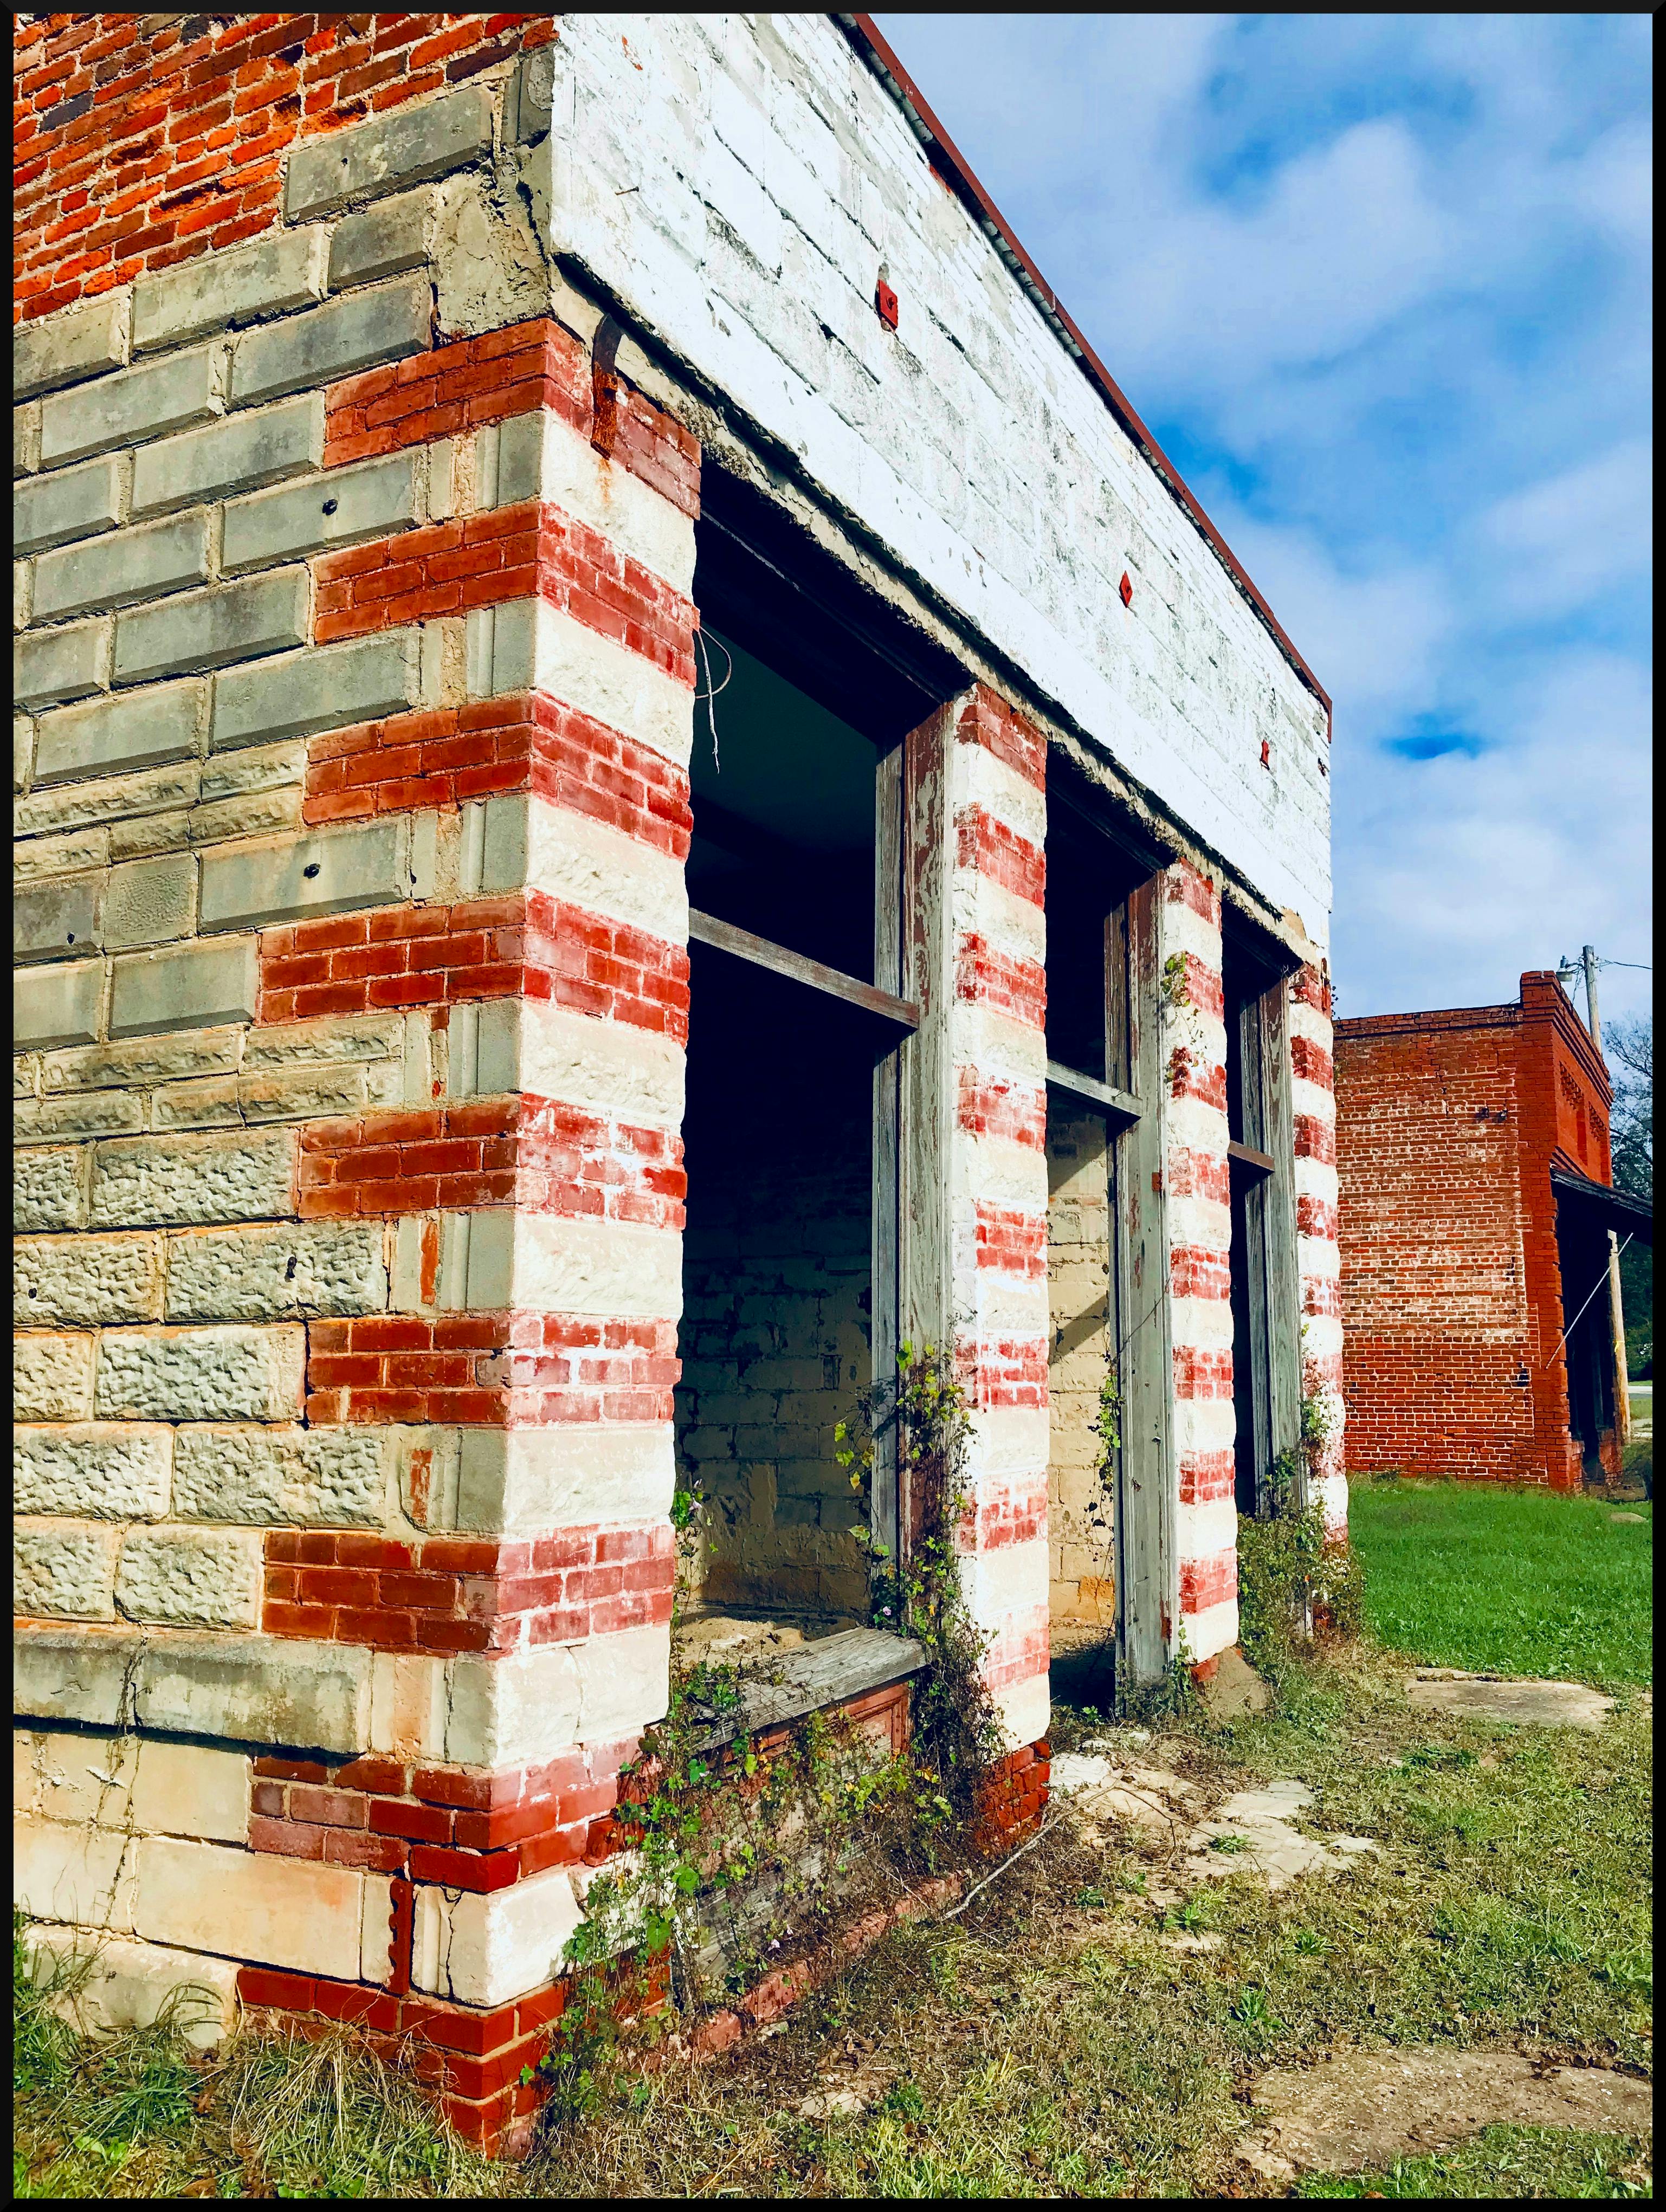 Free stock photo of abandoned building, Historic Building, old store front